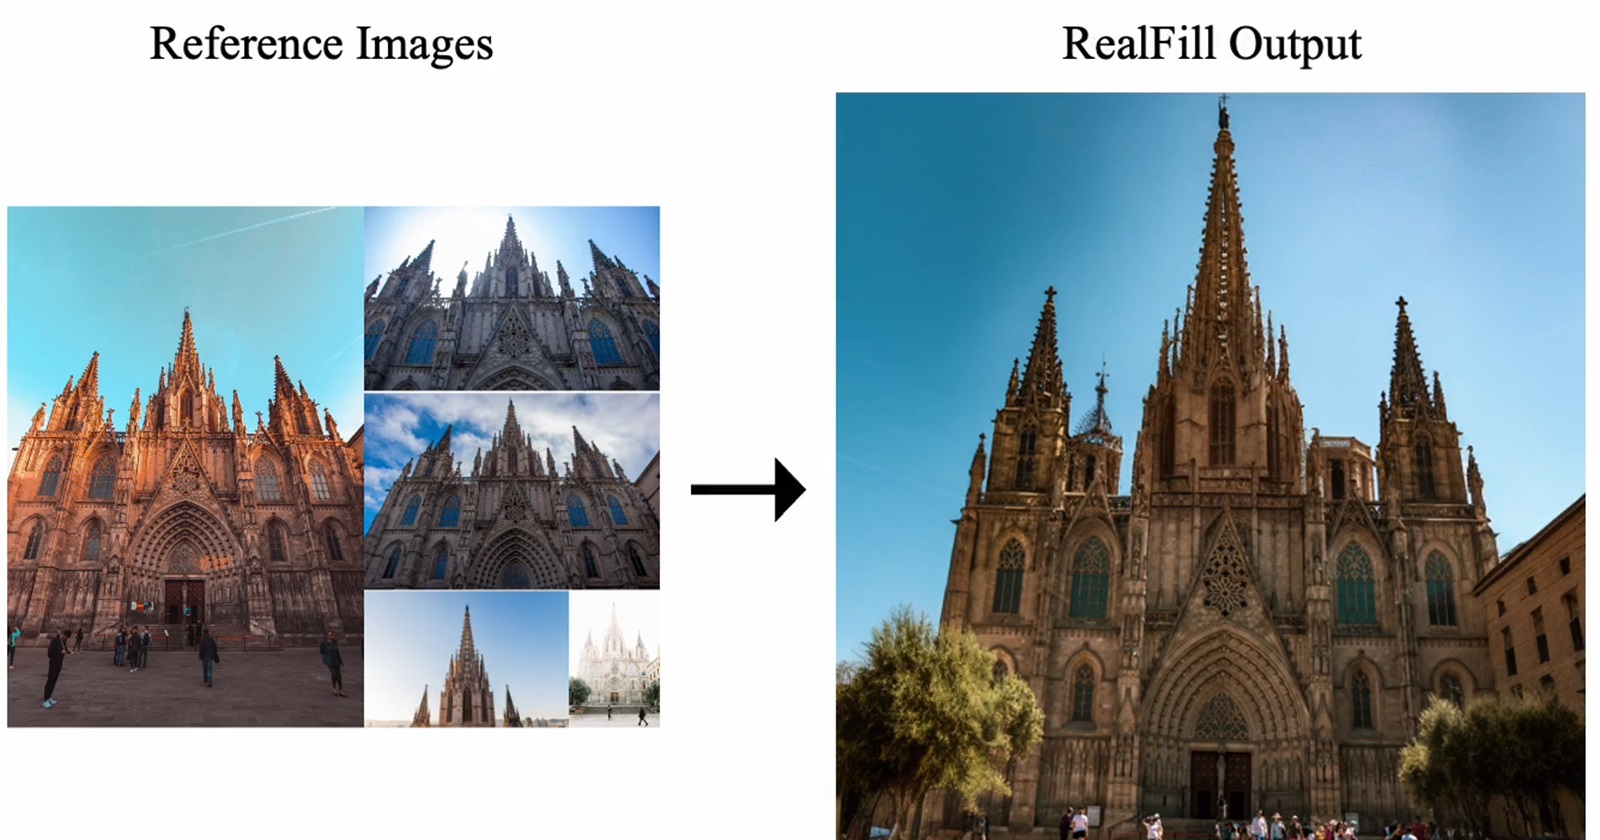 Google's RealFill AI magic fills photos with what's missing using reference images